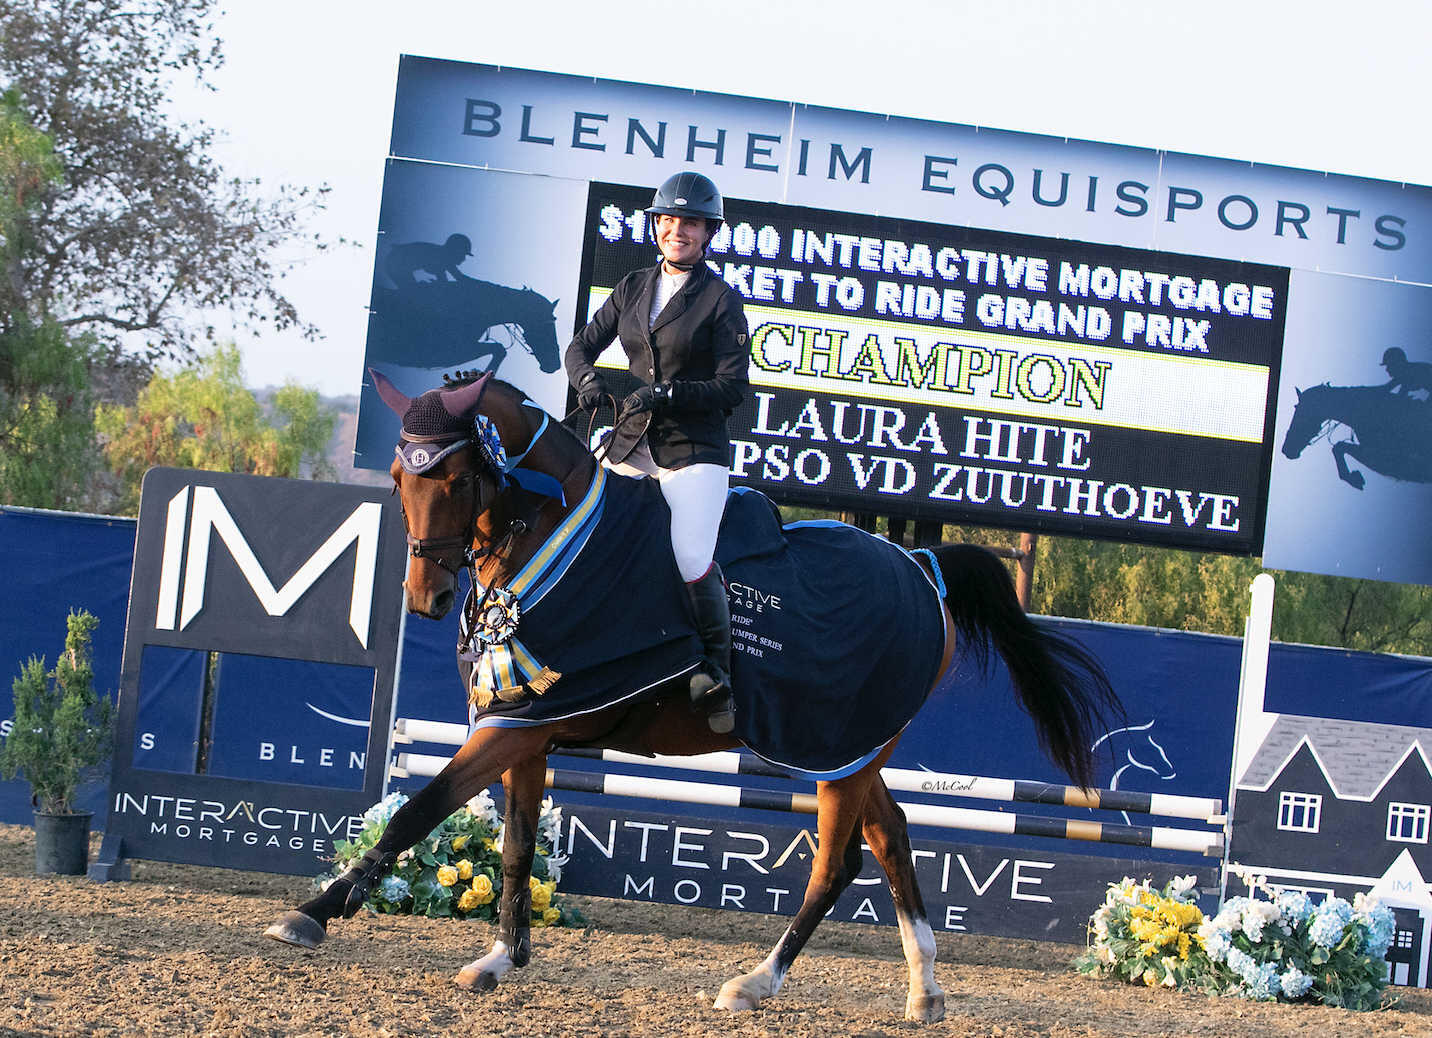 Laura Hite and Calypso VD Zuutheove are all smiles leading the victory gallop.